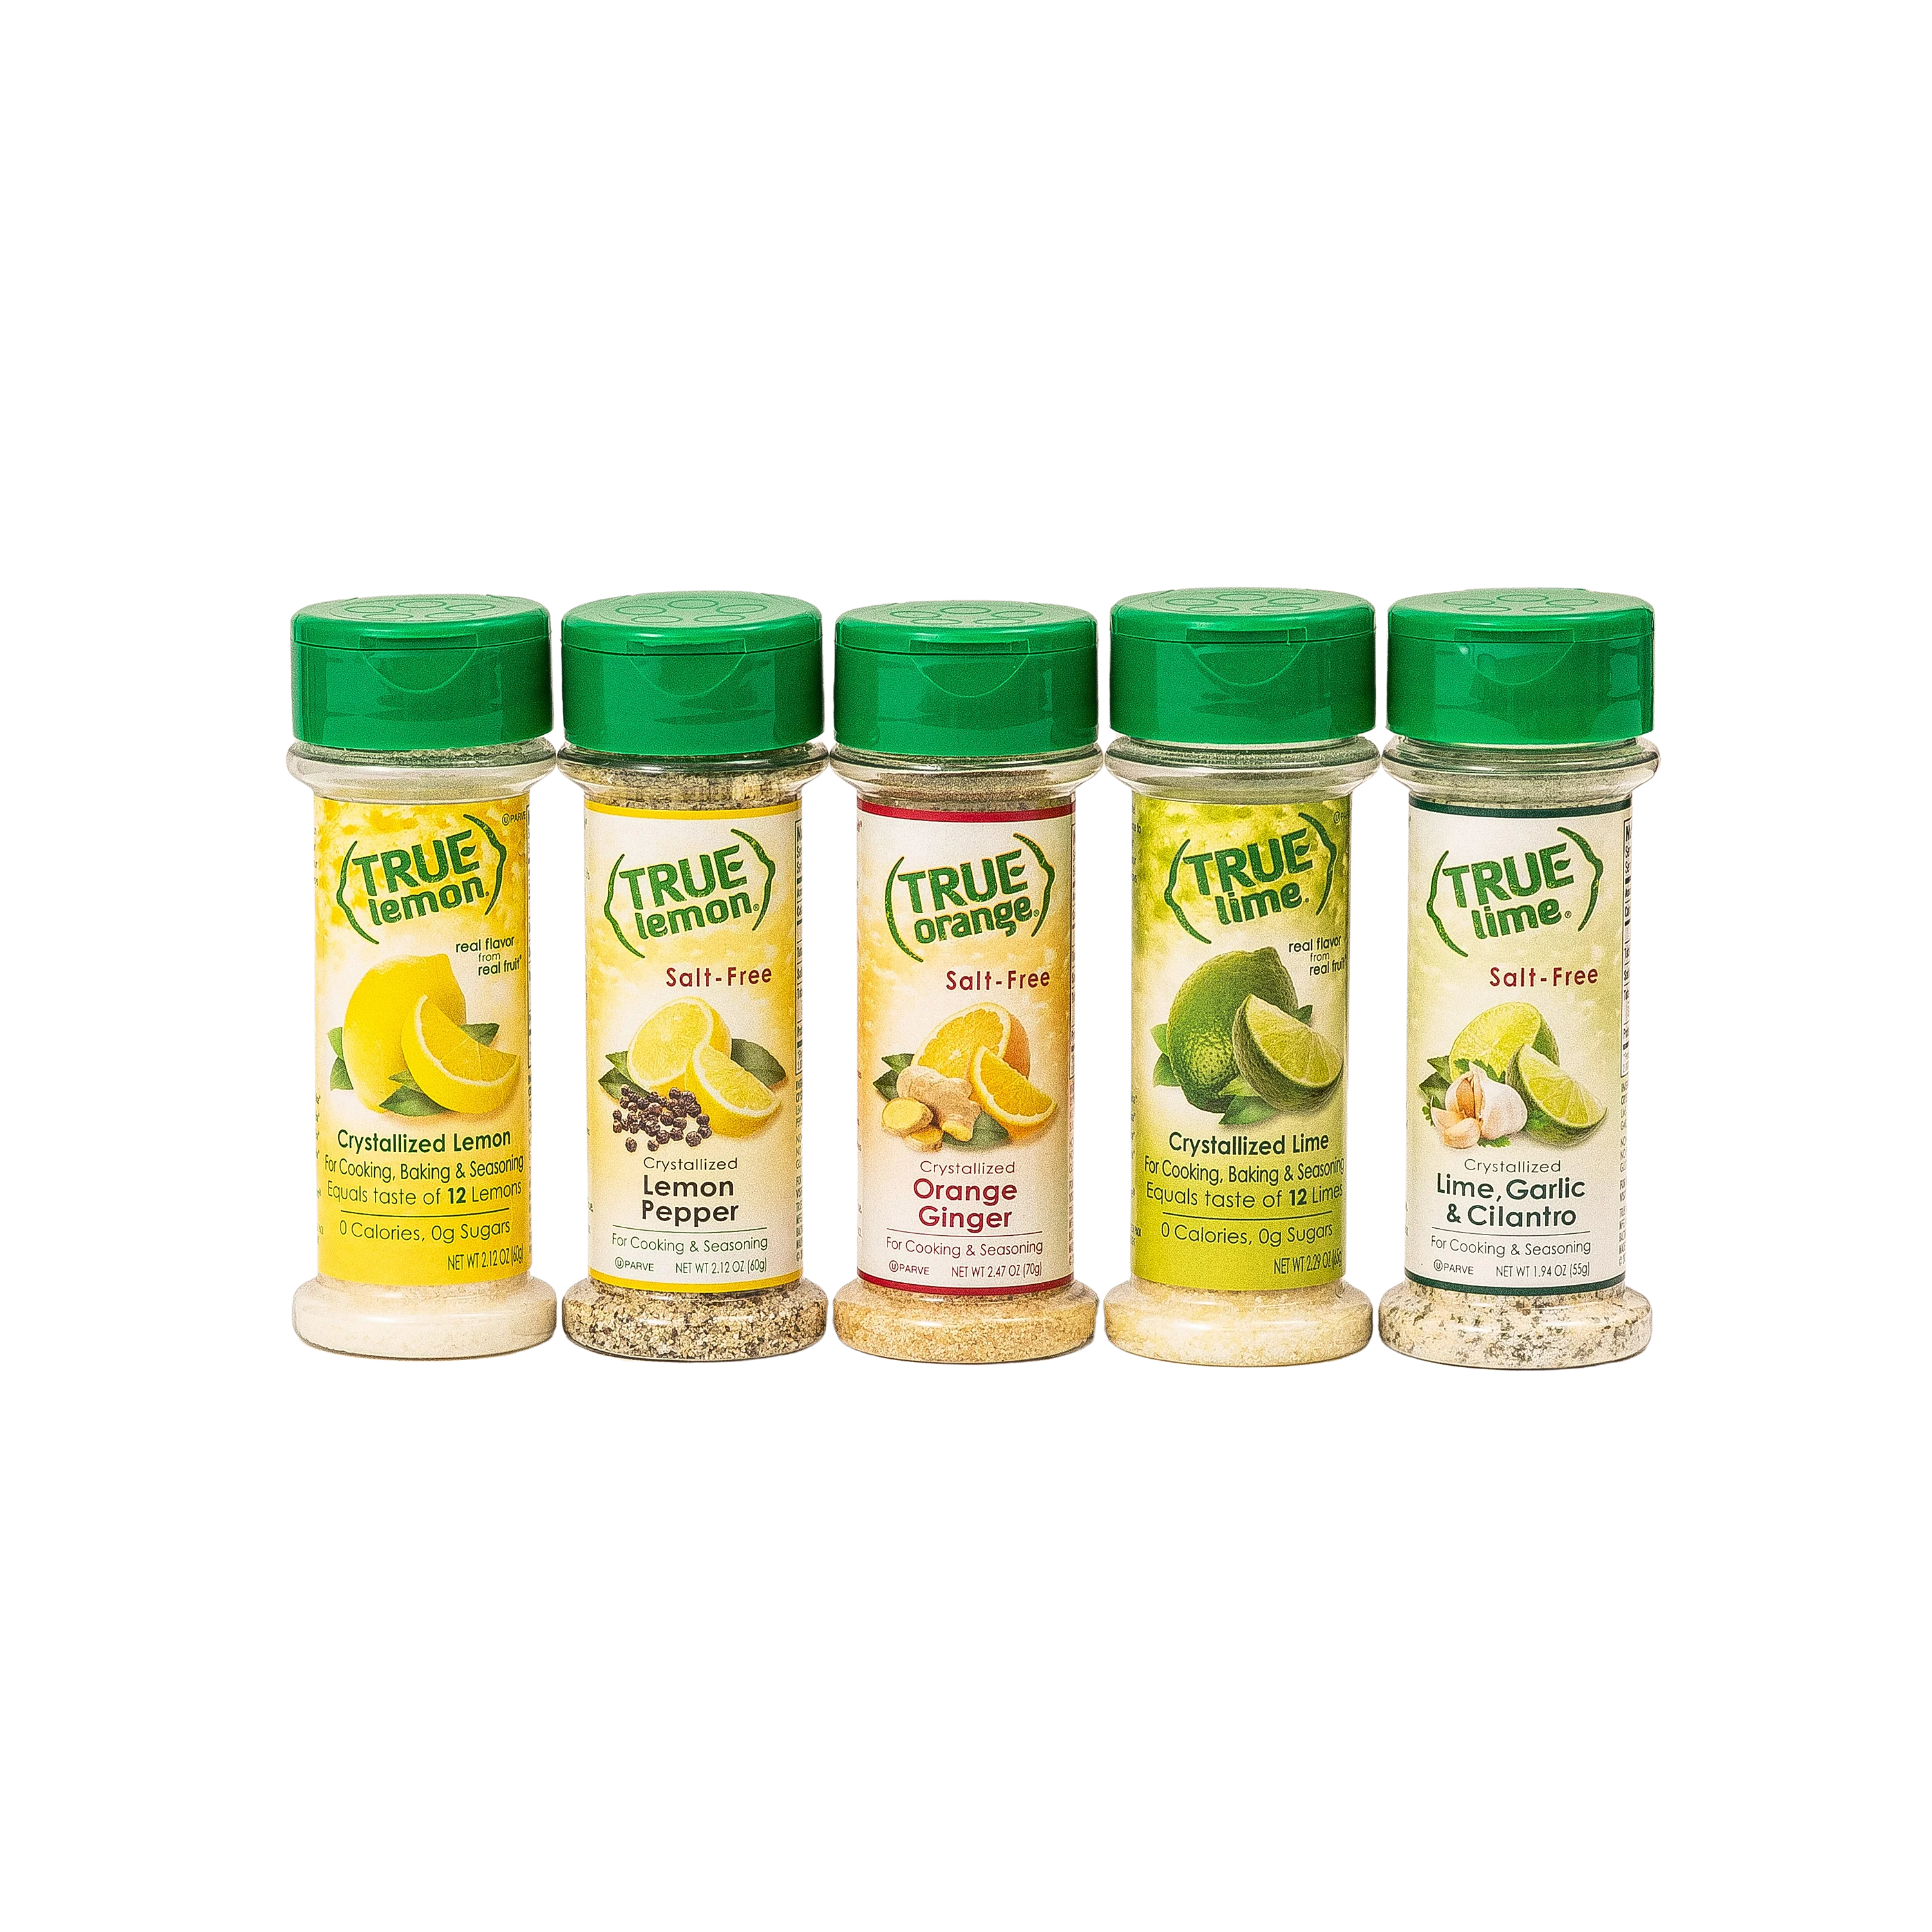 A collection of 5 types of true lemon seasonings.